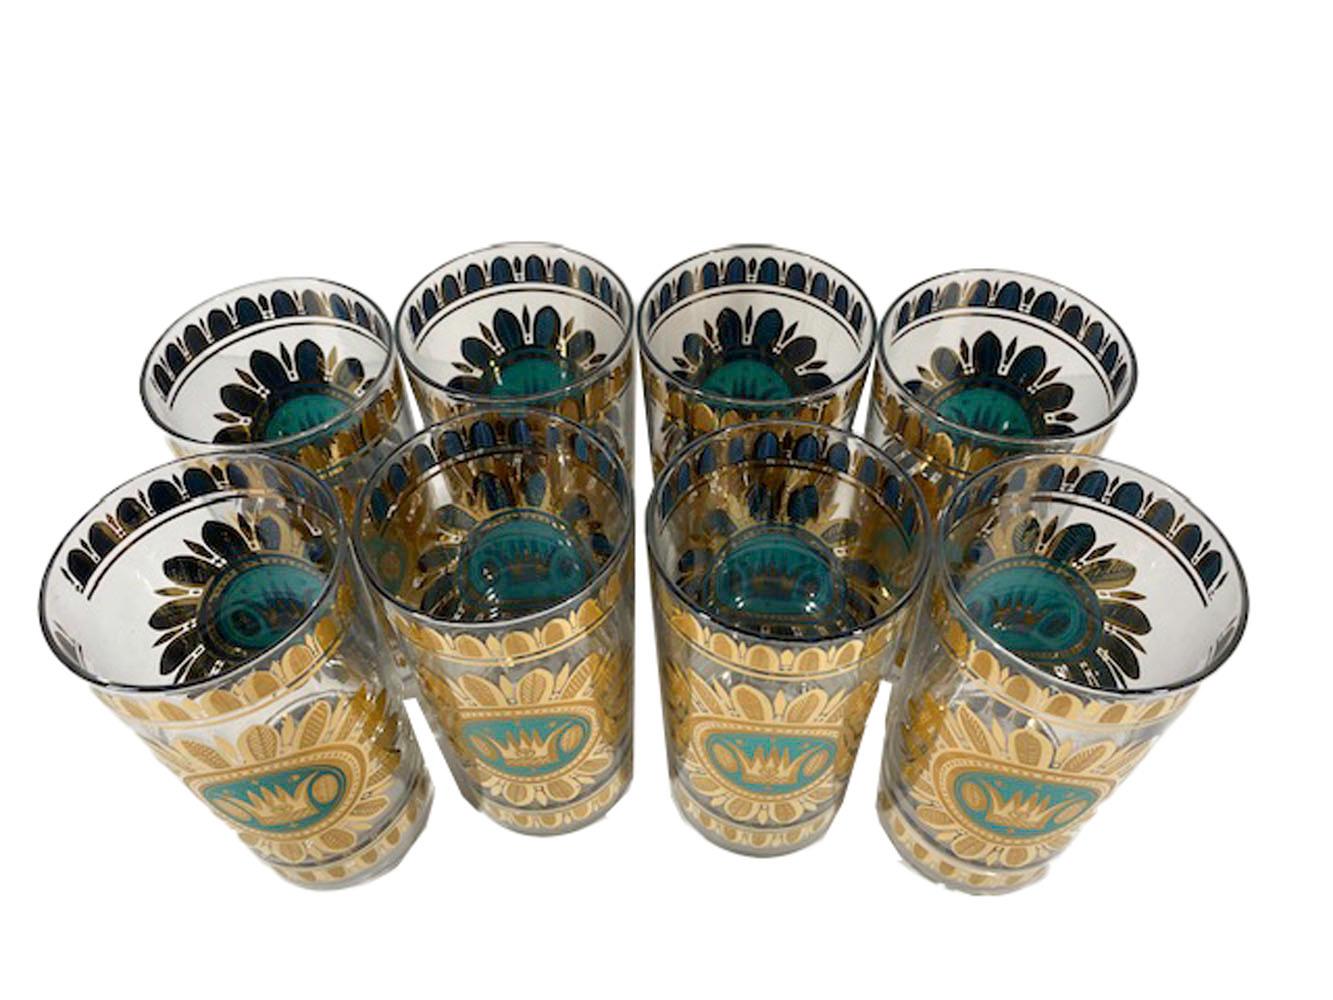 Eight vintage highball glasses designed by Georges Briard in the Regalia pattern in 22k gold with aqua and blue detail.